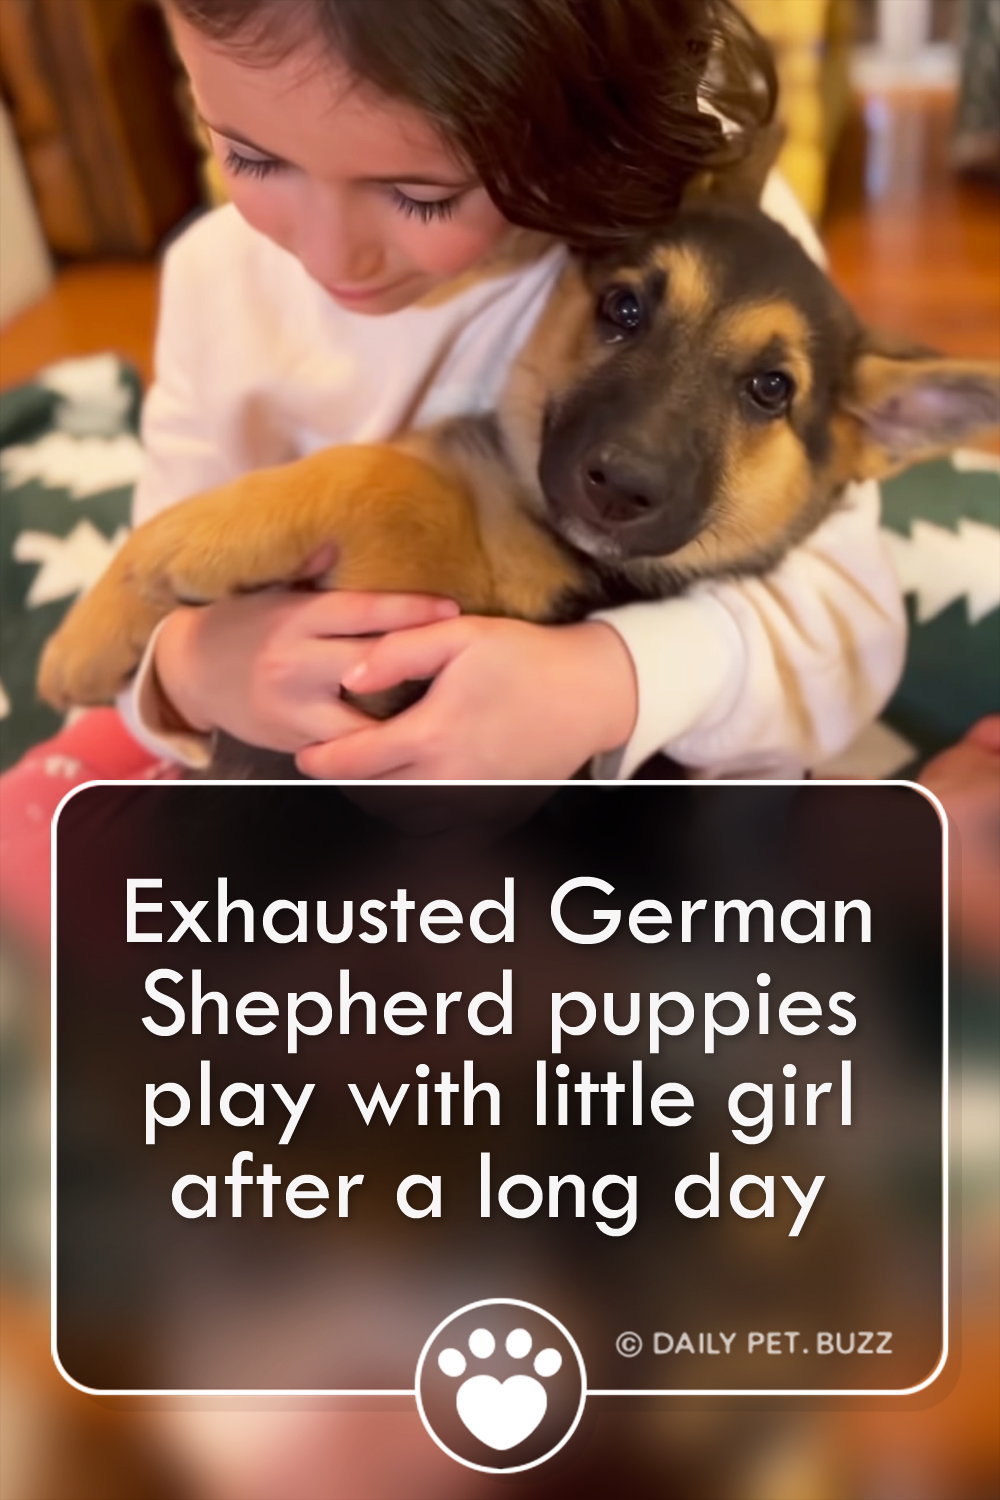 Exhausted German Shepherd puppies play with little girl after a long day